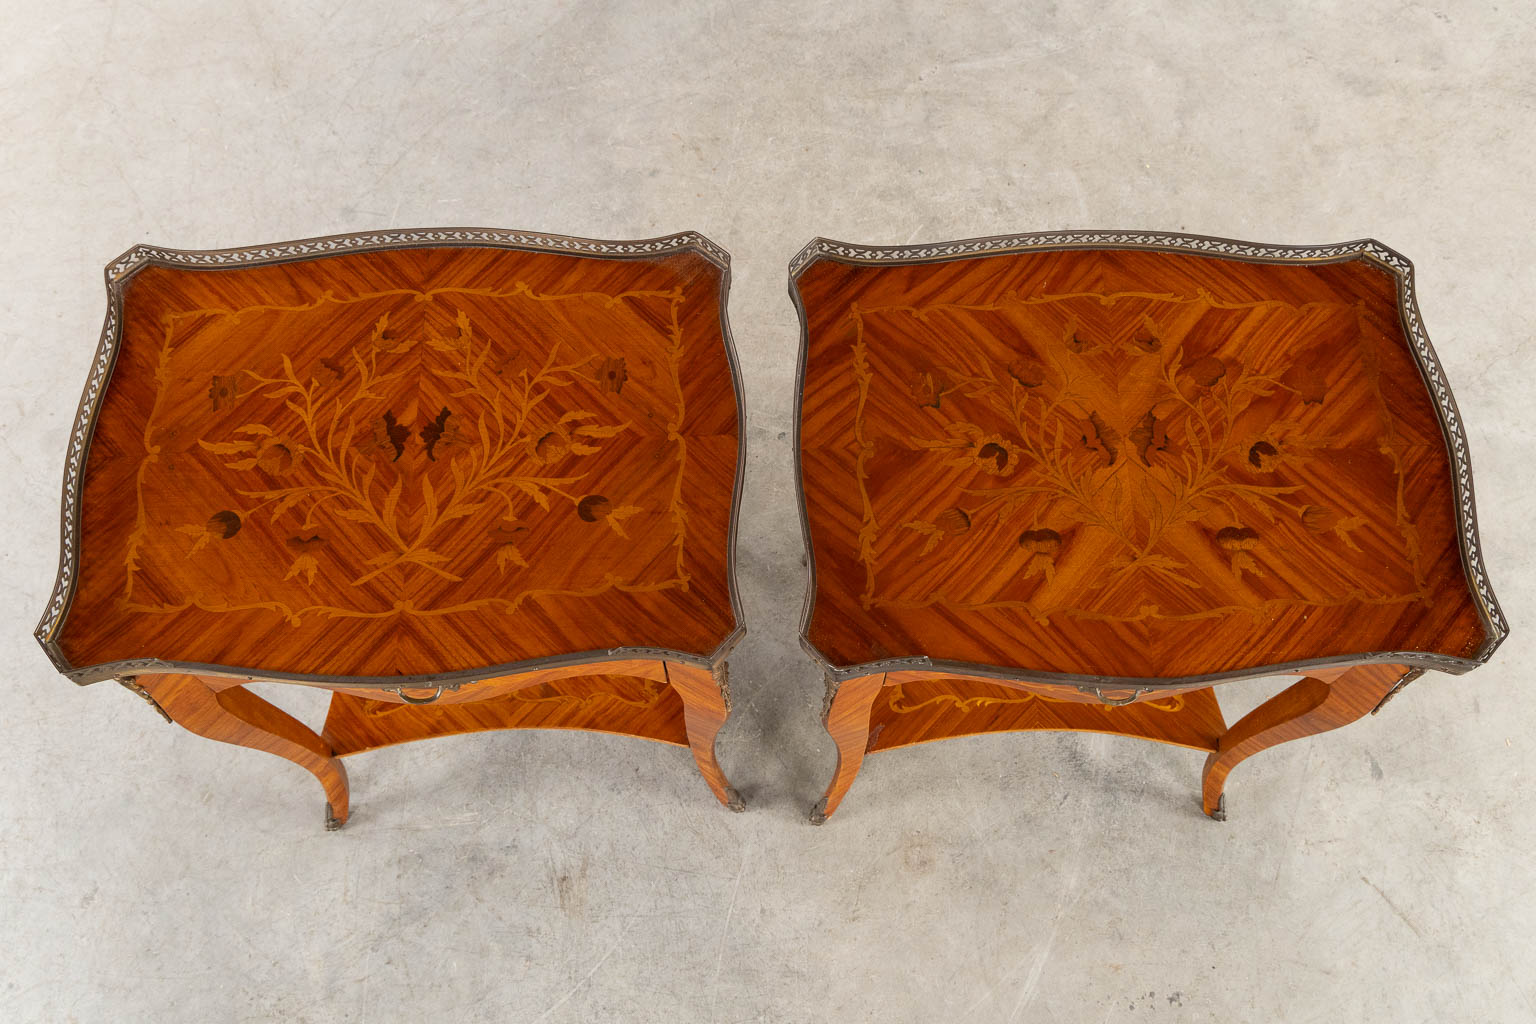 A pair of side tables, marquetry inlay and mounted with bronze. (L:37 x W:51 x H:65 cm) - Image 12 of 13